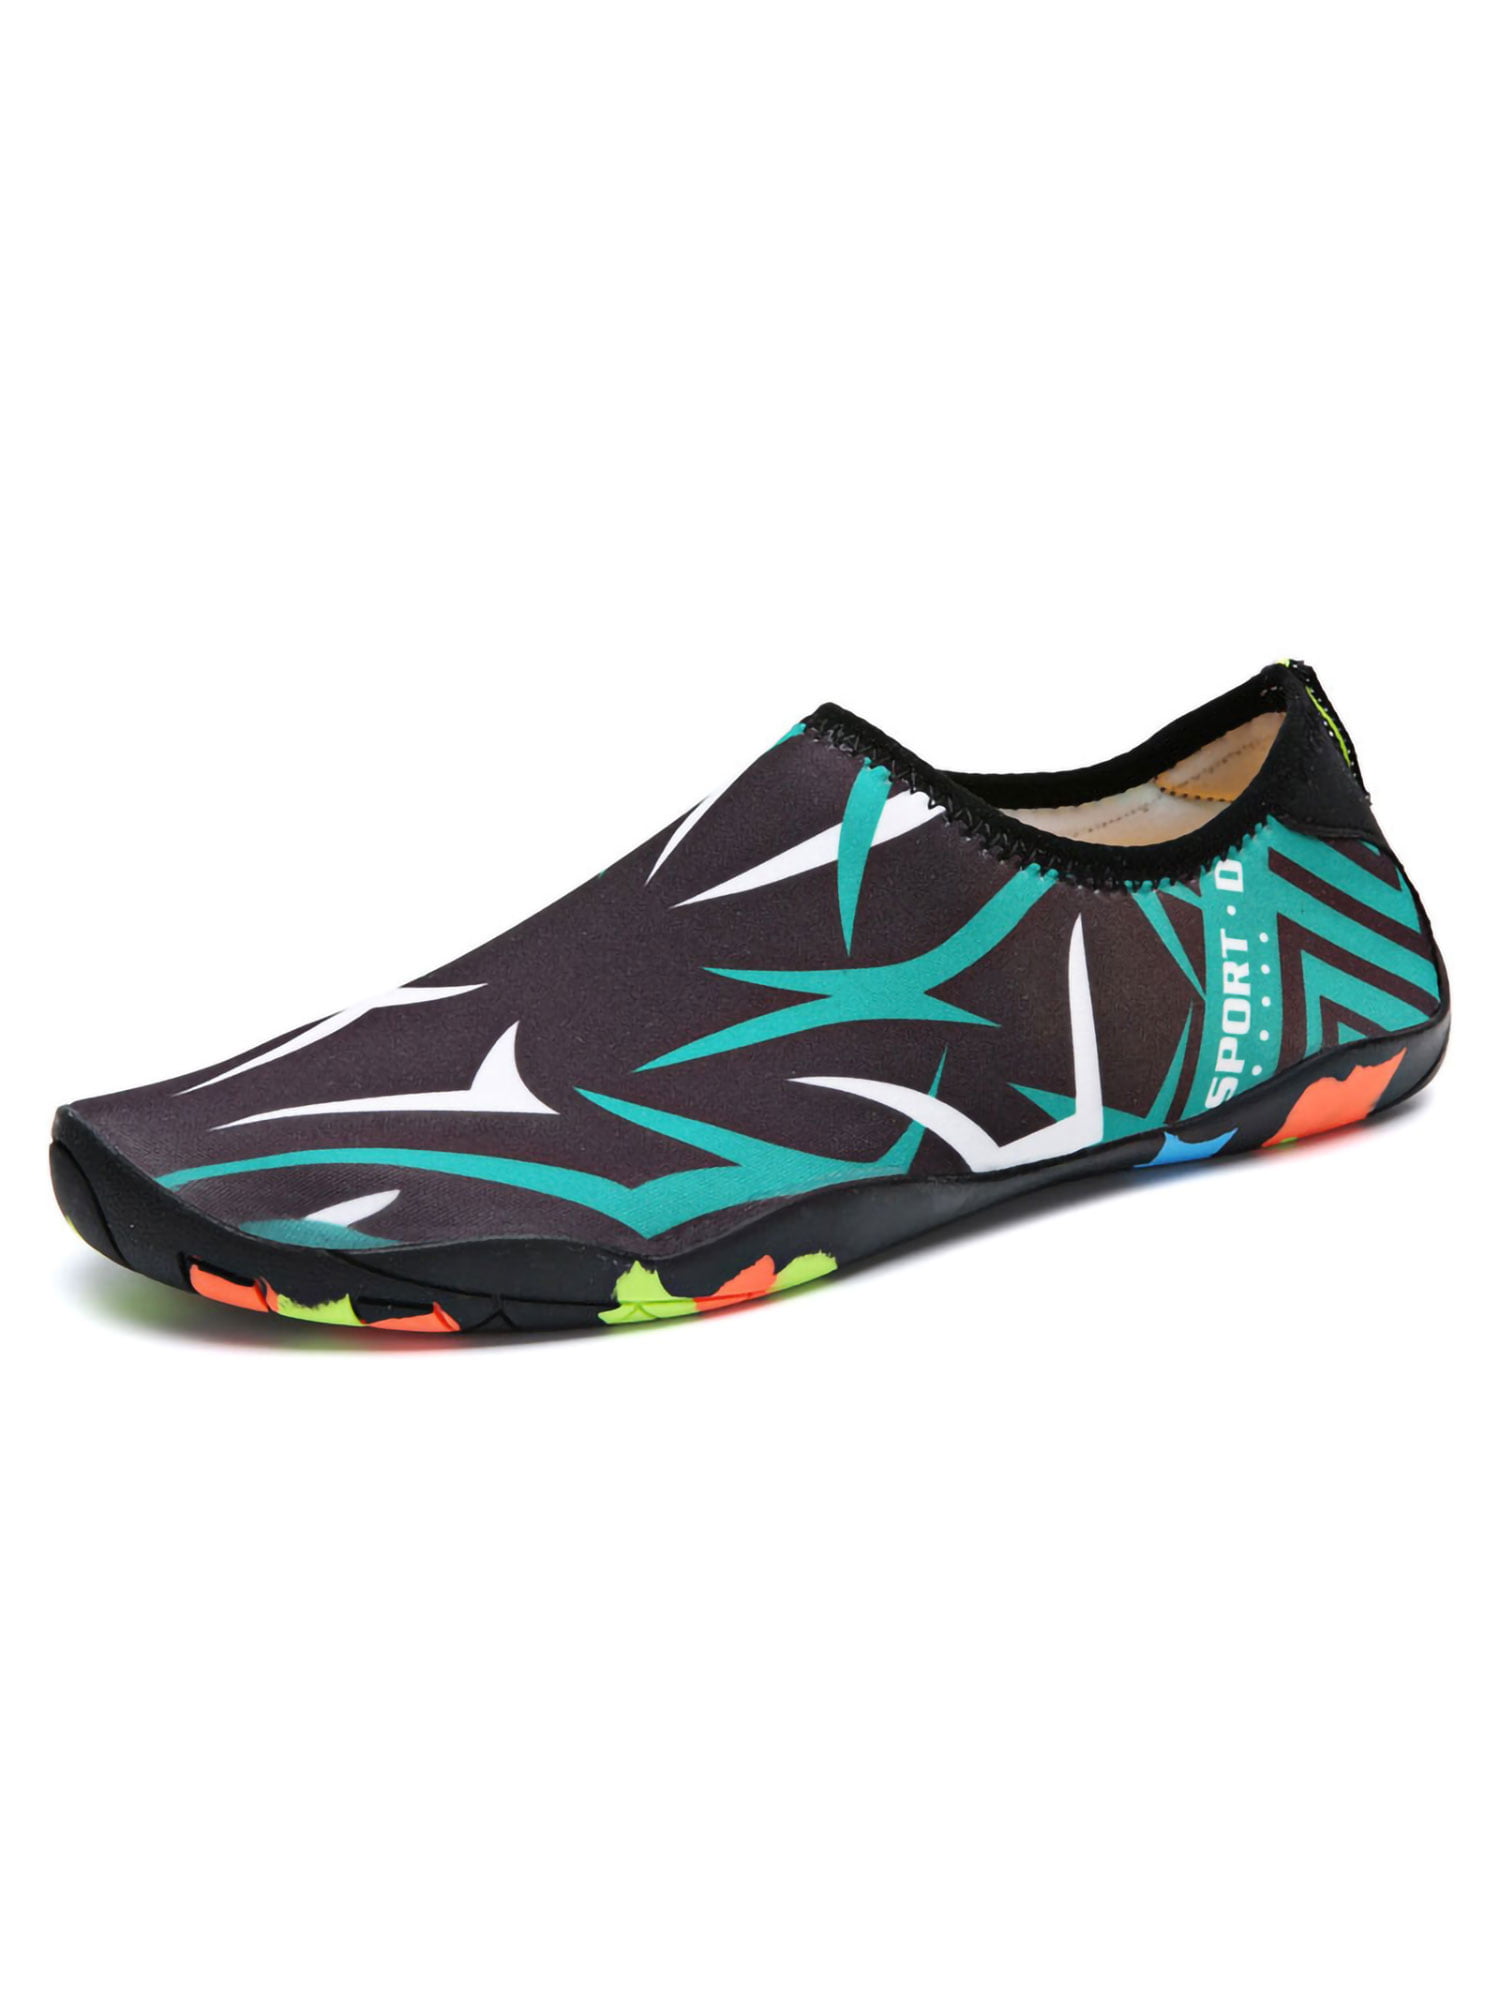 Details about   Water Shoes Quick-Dry Barefoot Aqua Shoes Swim Surf Slip-In Beach Sports Socks 